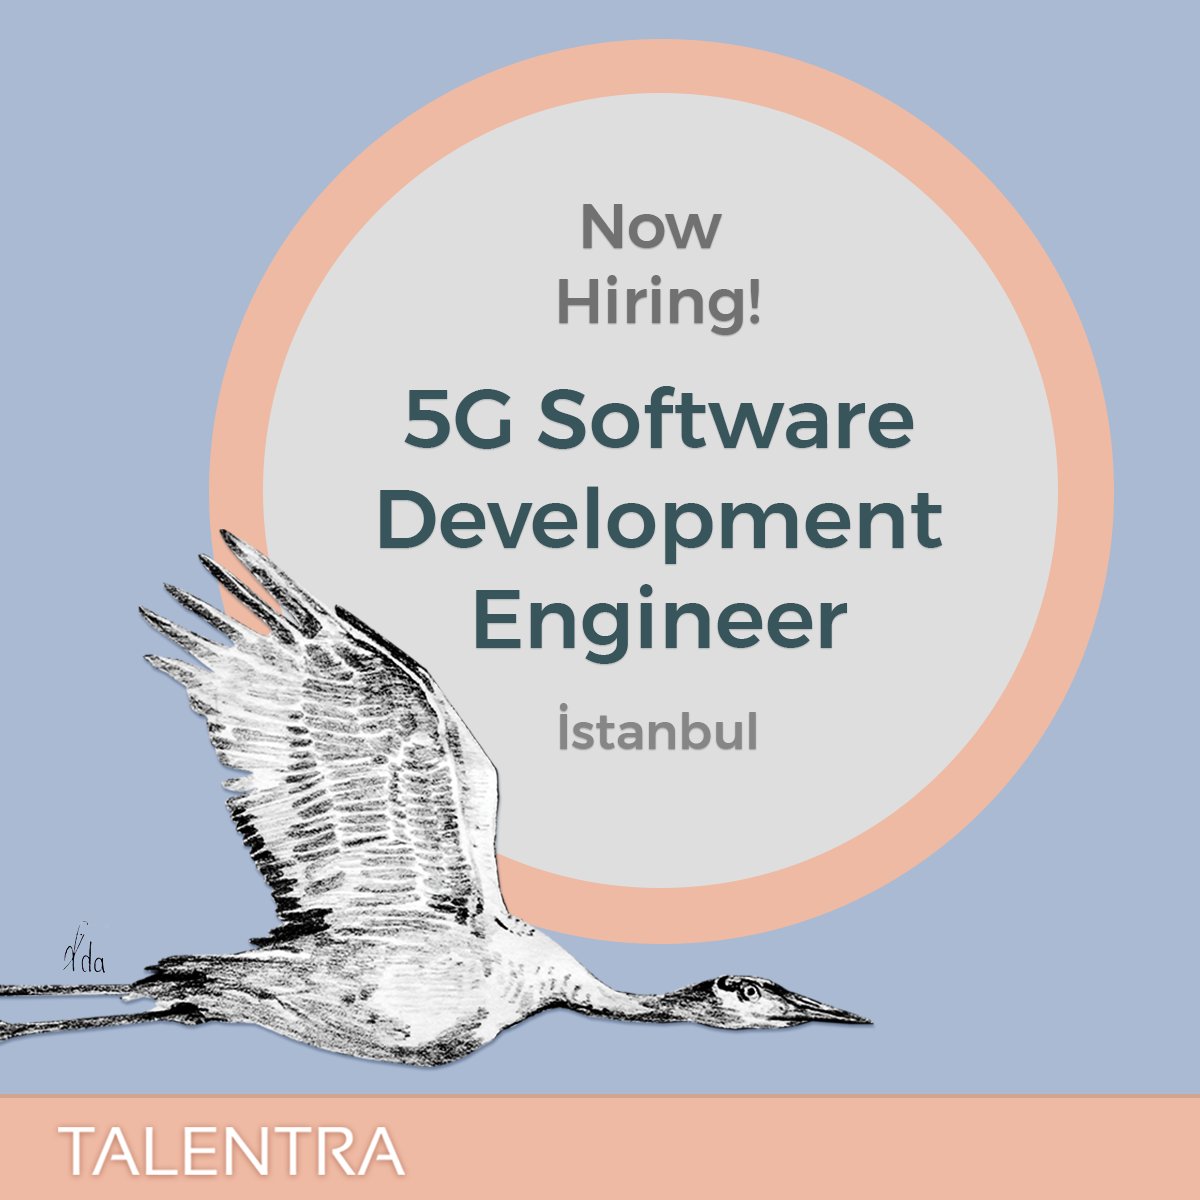 We are hiring for our global client, which is Europe's largest technology company that operates in healthcare, energy, and production industries. To apply: talentra.net/Jobs/Detail/5g… #jobsearch #Recruiting #SoftwareEngineering #talentra #talentrajobs